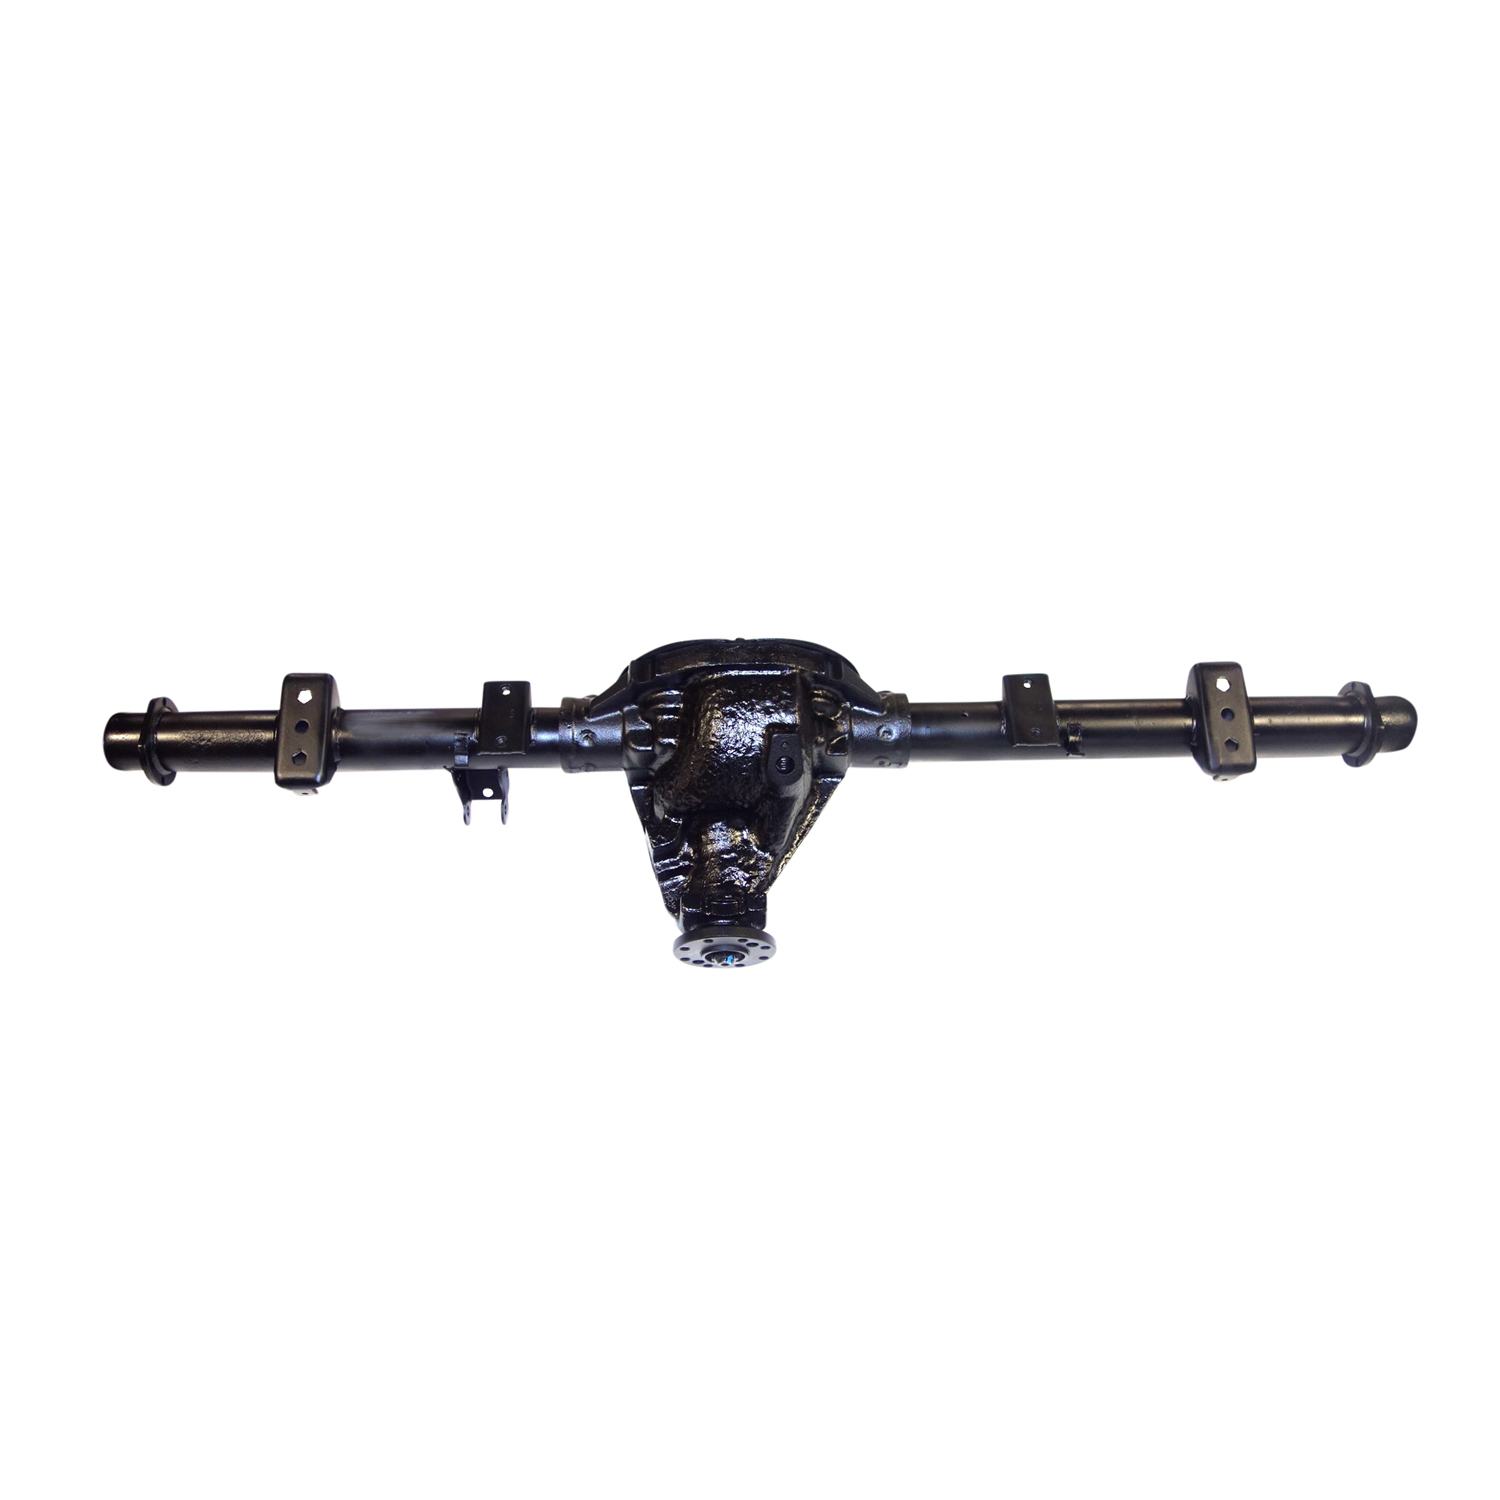 Remanufactured Complete Axle Assembly for Chy 8.25" 98-02 Durango 3.92 , 4x4, Posi LSD